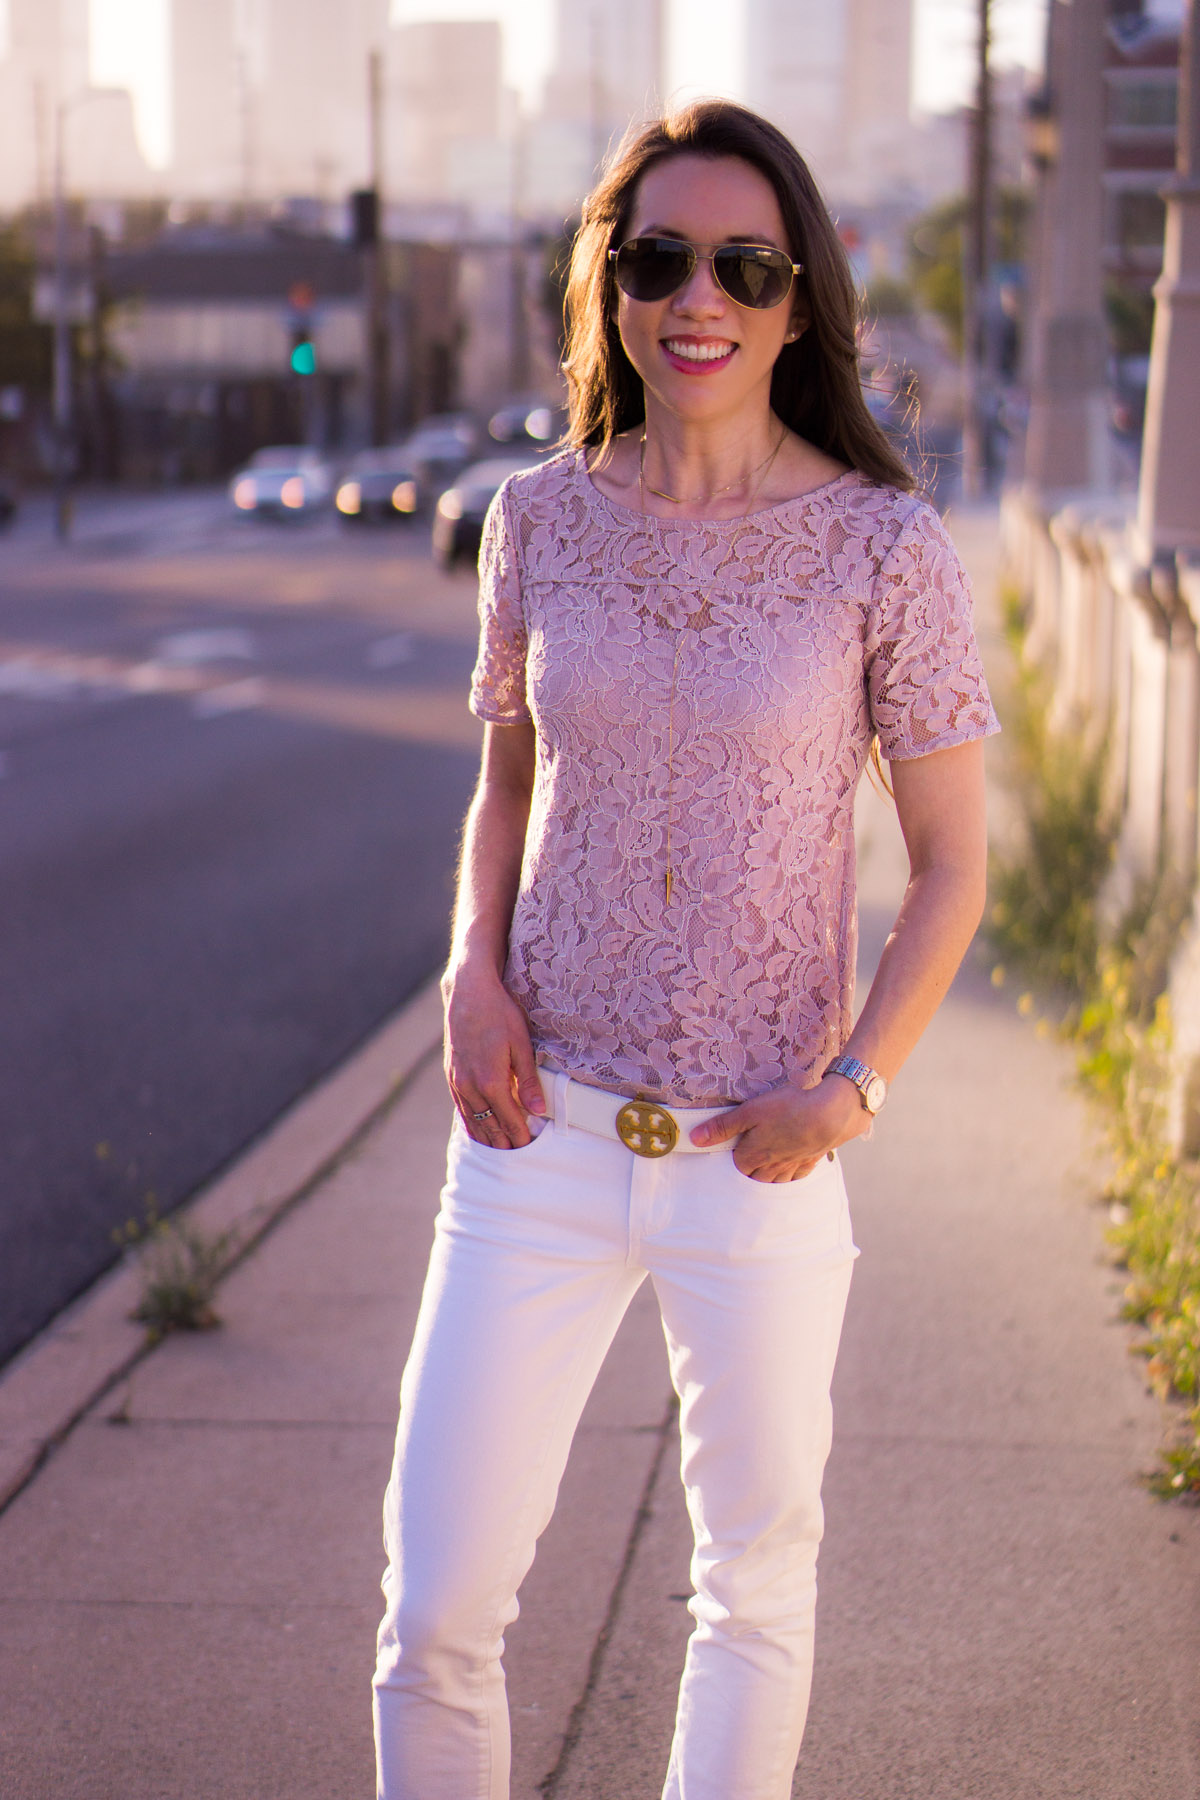 5 Reasons to Wear Lace Tops